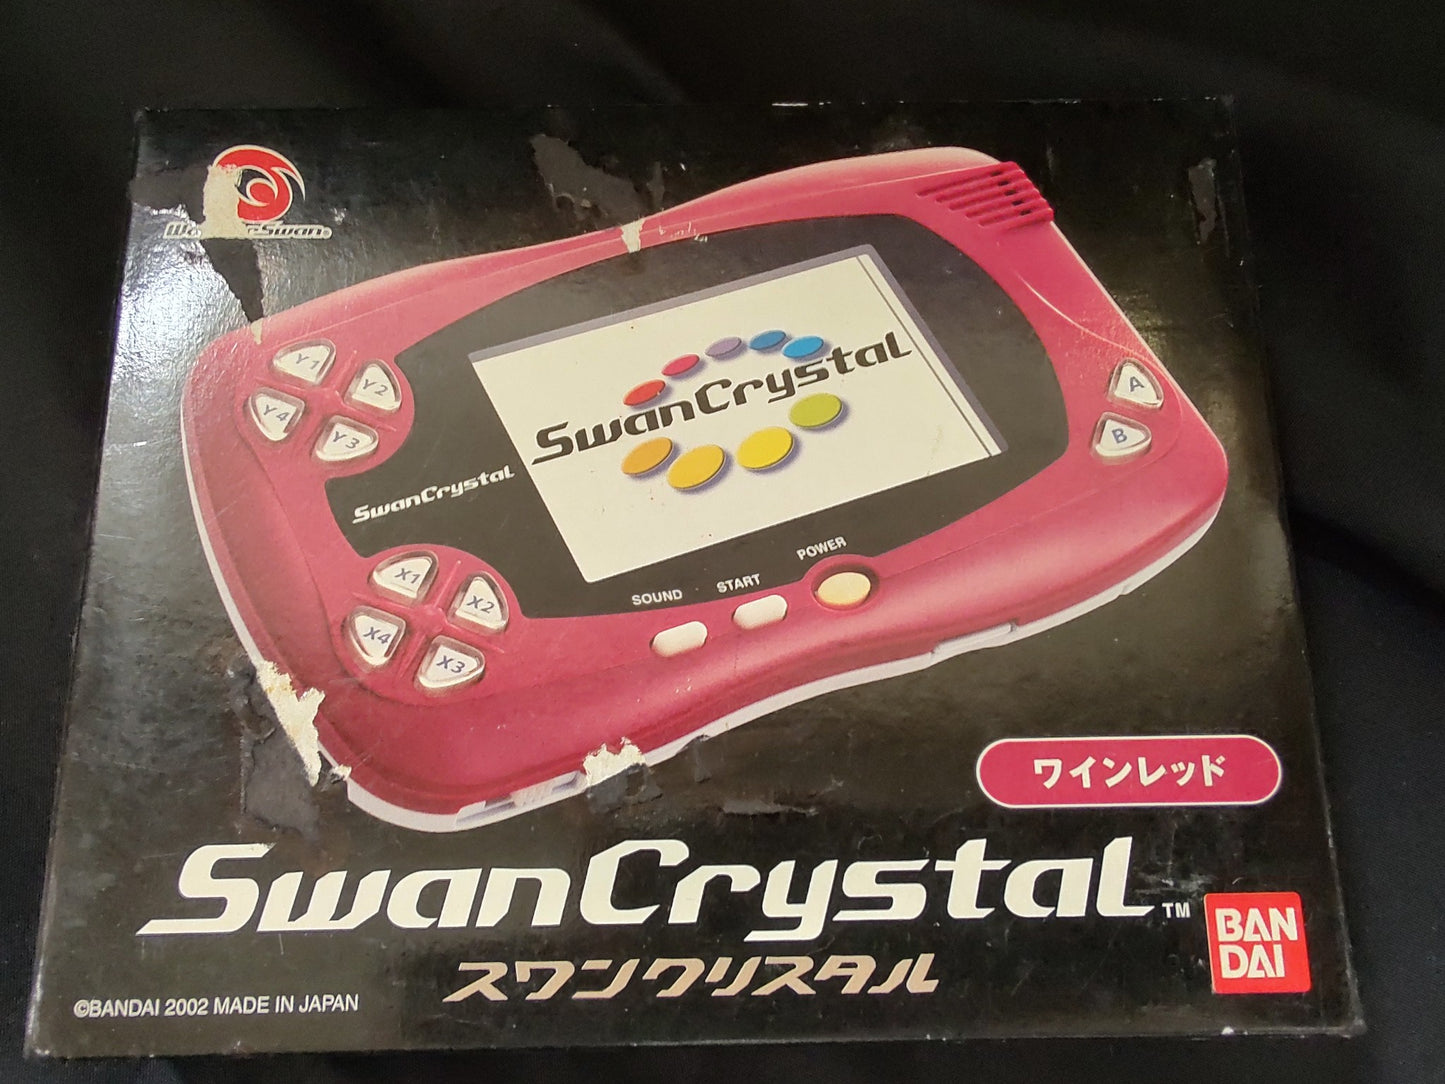 Wonder Swan Crystal Wine red BANDAI Console, Manual, Boxed set tested-f0714-